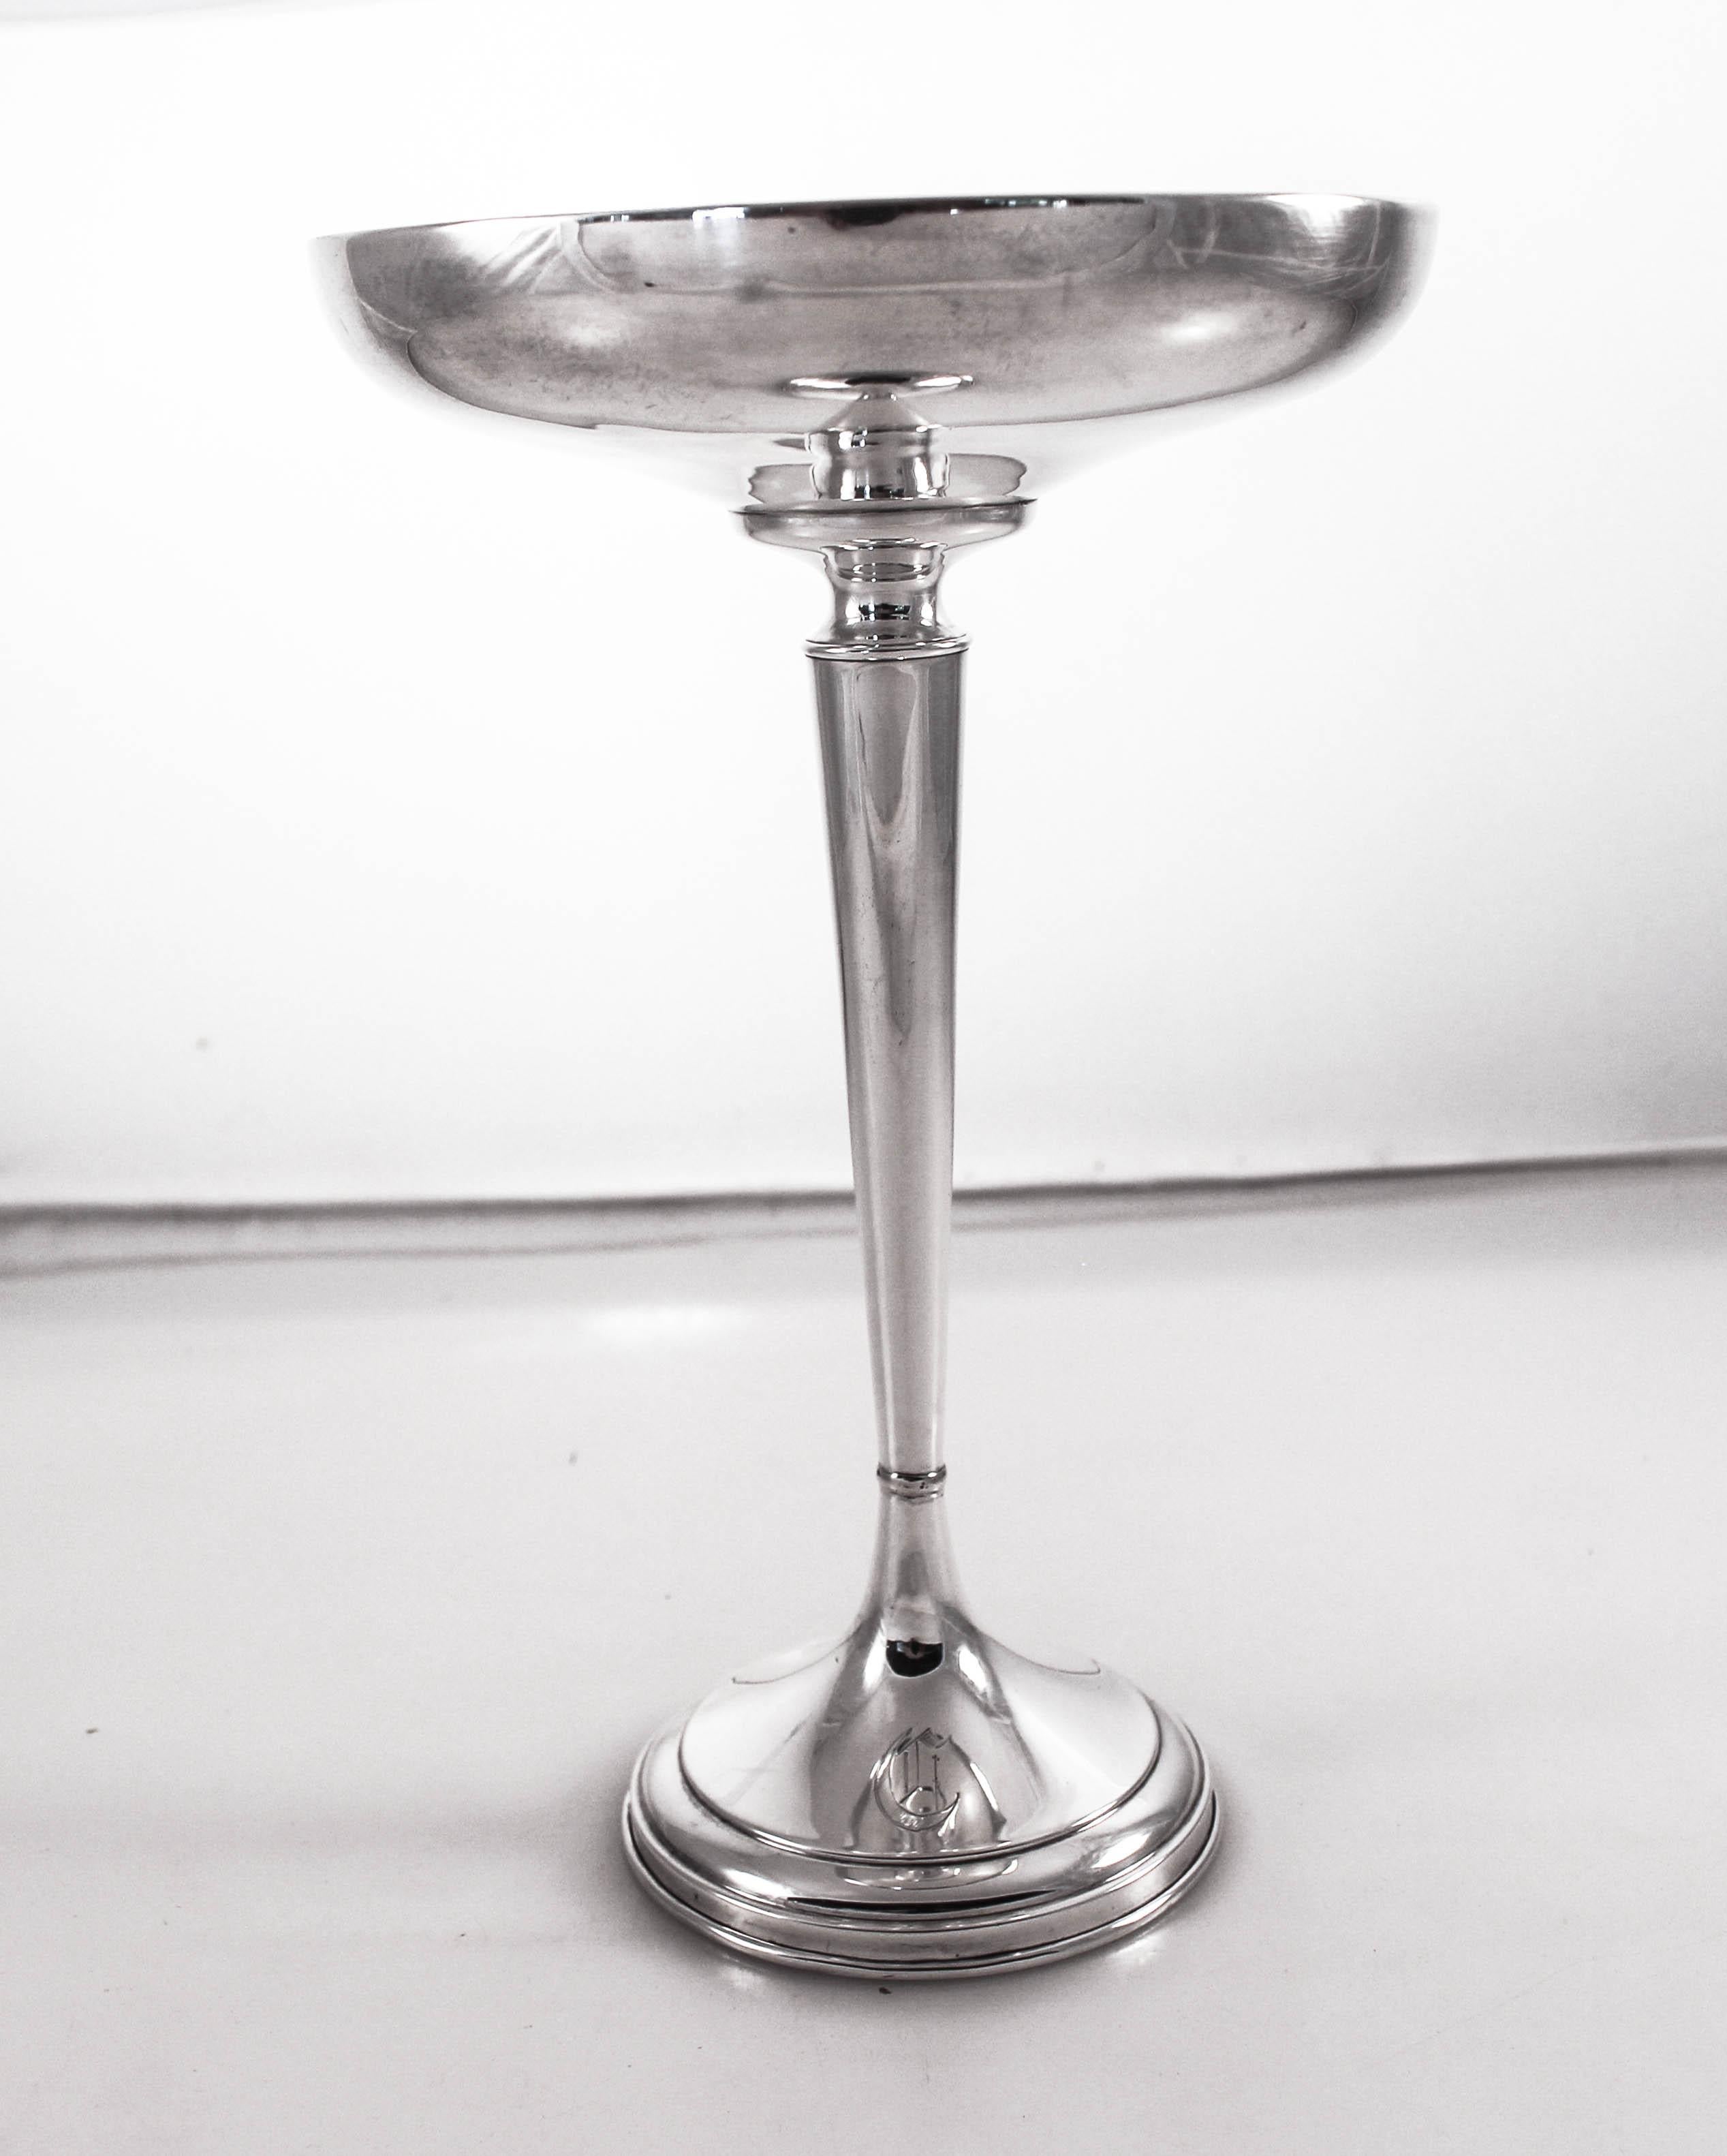 We are thrilled to offer this pair of Art Deco sterling silver compotes by Redlich & Co. They are tall with a tapered stem. The top has a curved shape that compliments the tapered stem and base. They are sleek and all about the shape. A smart